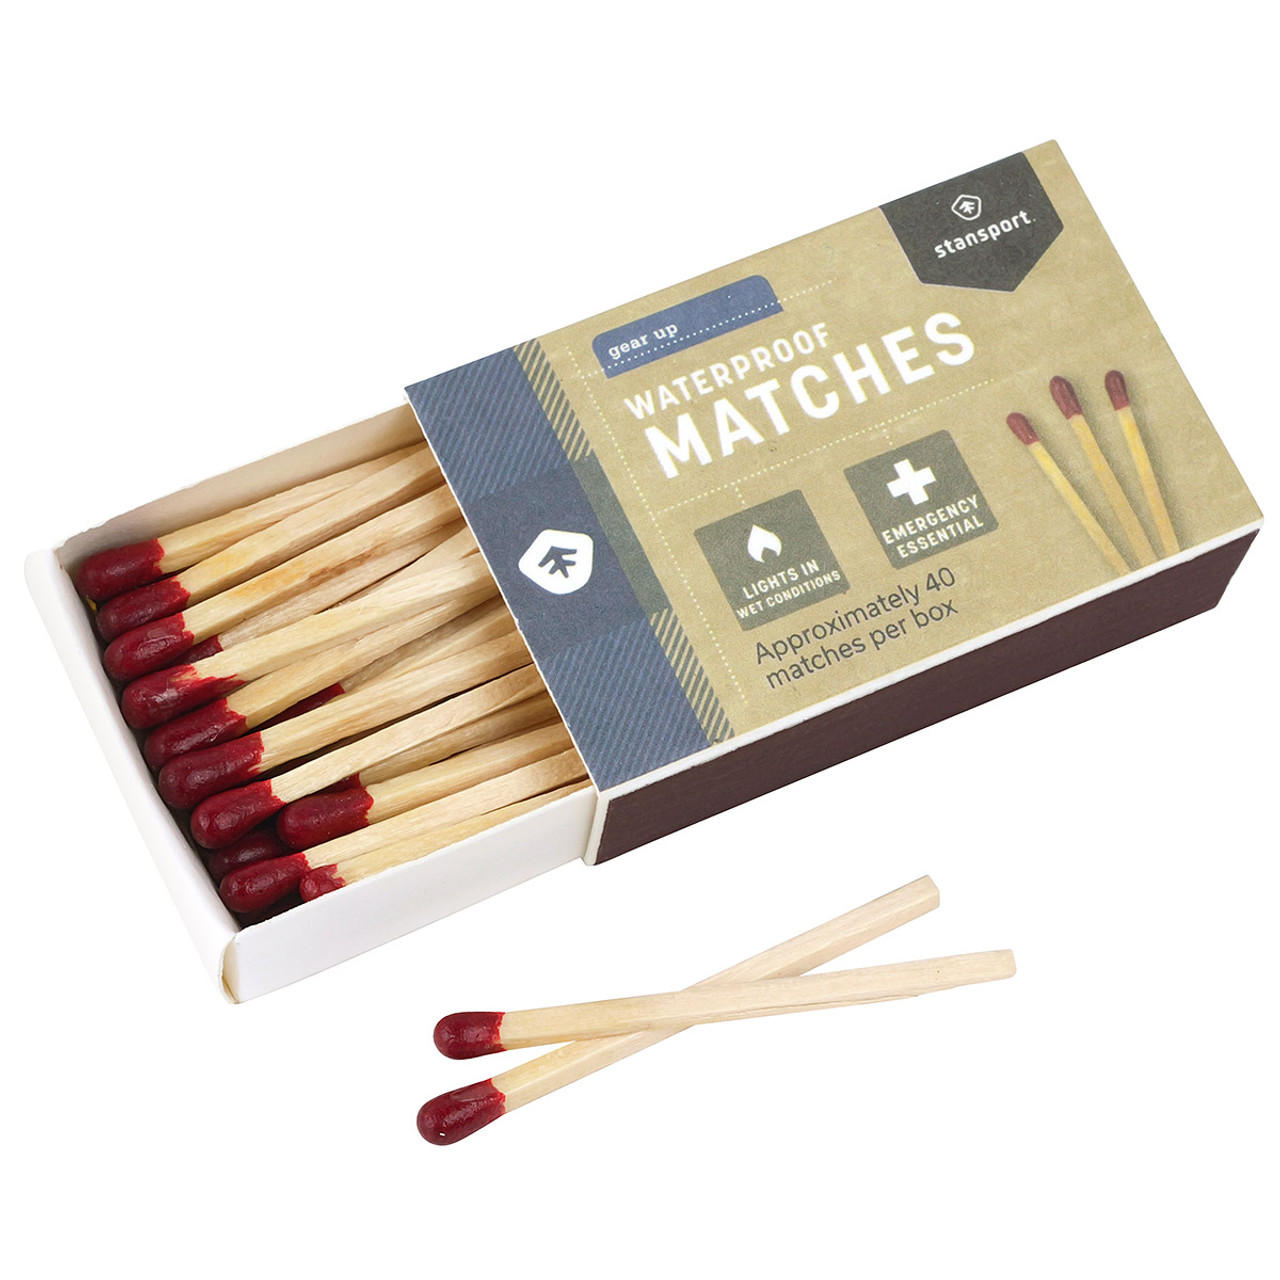 Stansport Waterproof Matches - Box of 40